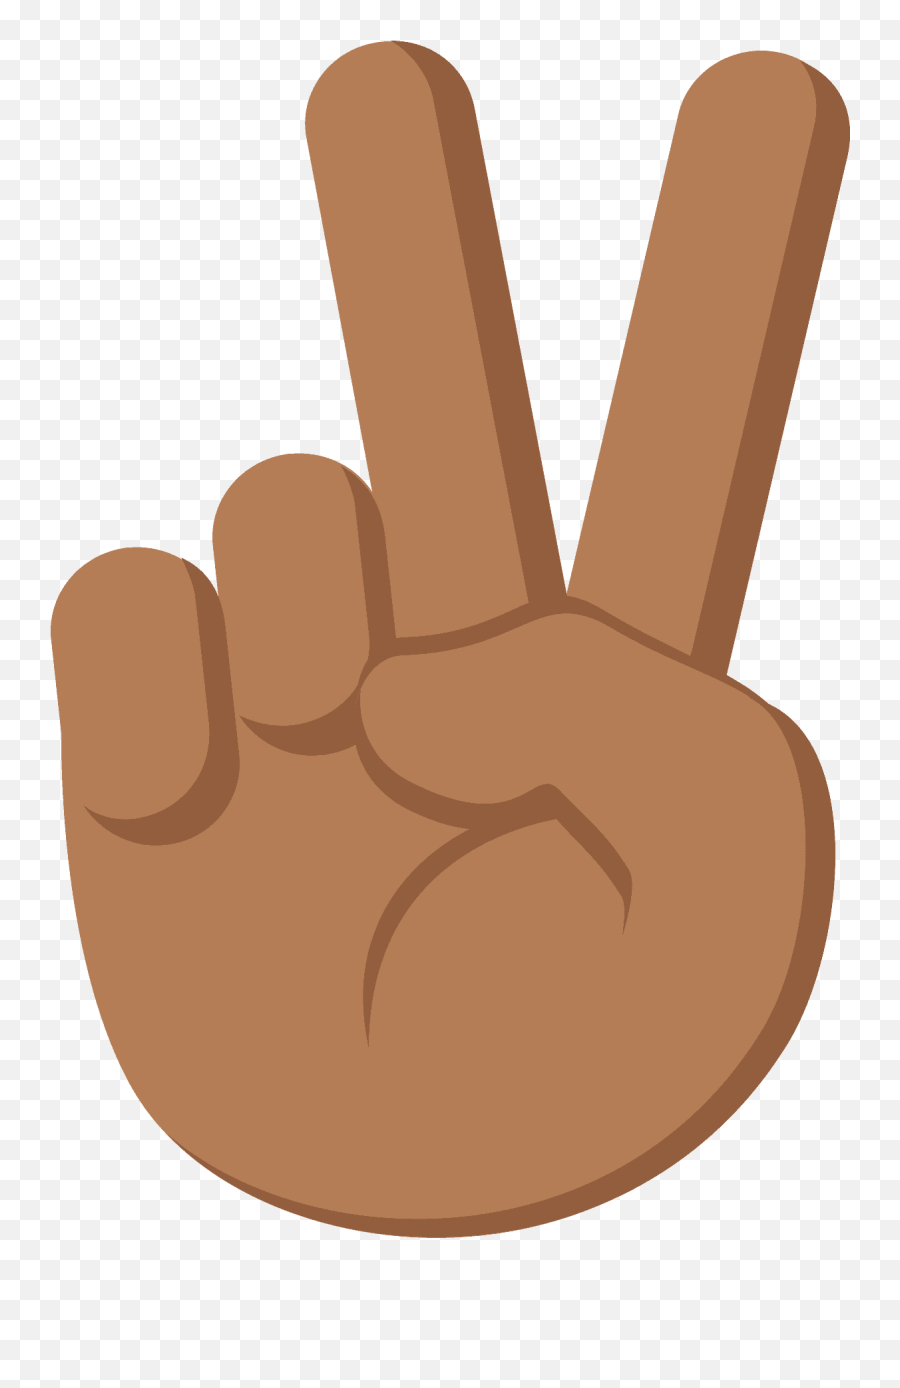 Victory Hand Emoji Clipart - 2,Vulcan Salute Emoji For Android